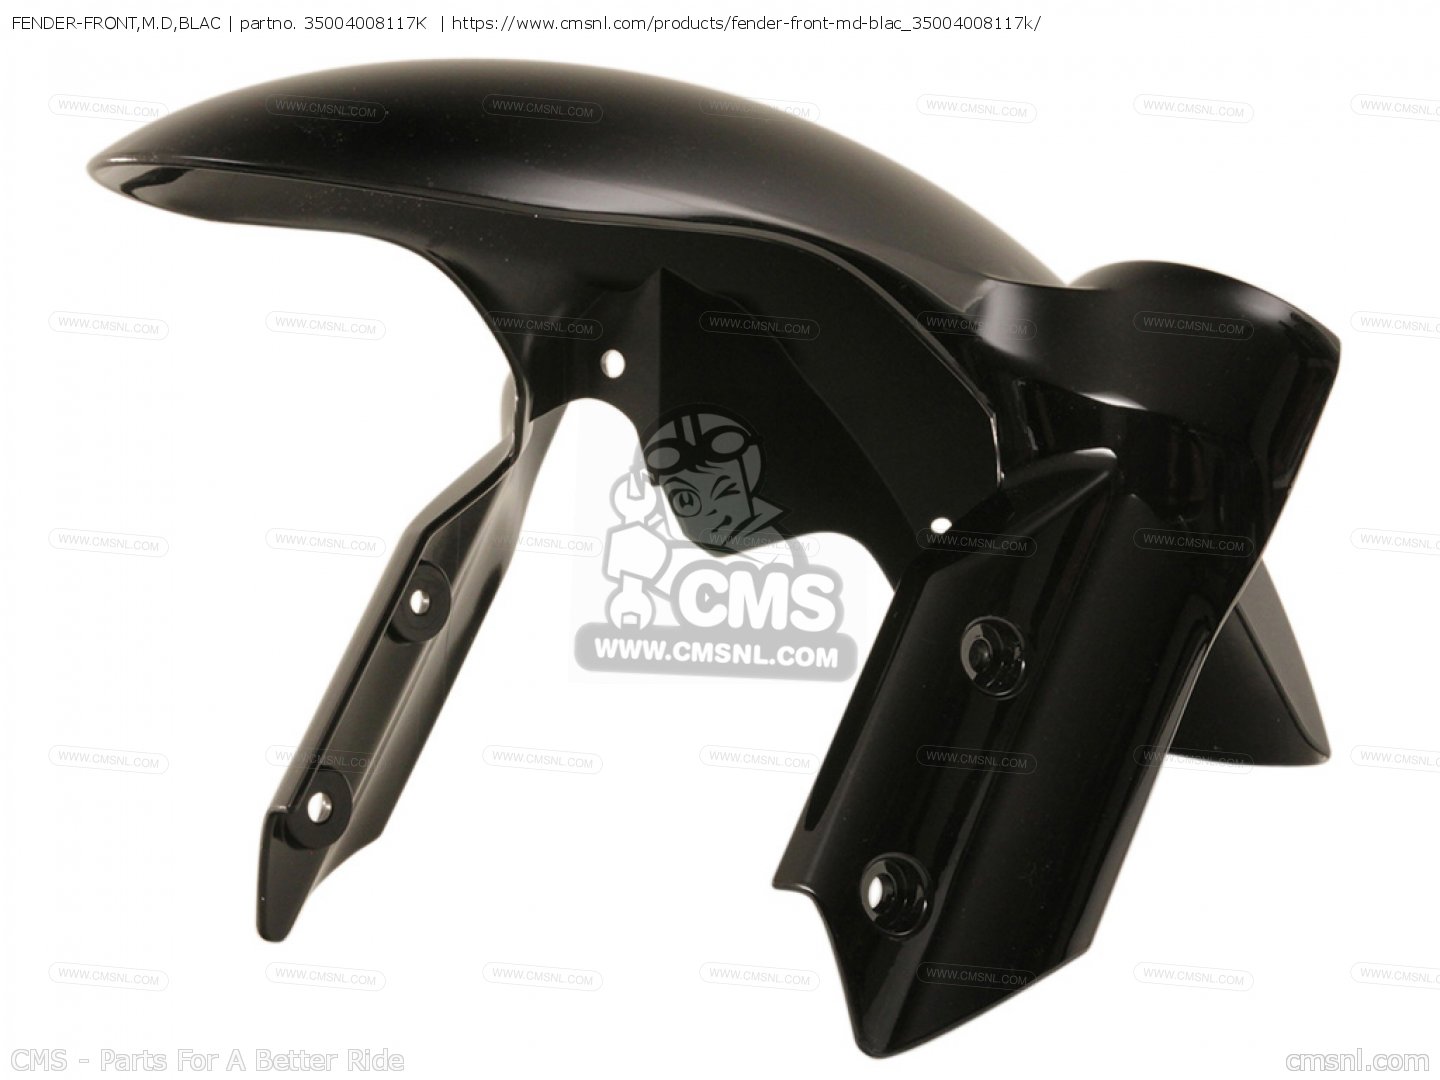 FENDER-FRONT,M.D,BLAC for KLE650B7F VERSYS EUROPE,MIDDLE EAST,AFRICA,UK - order at